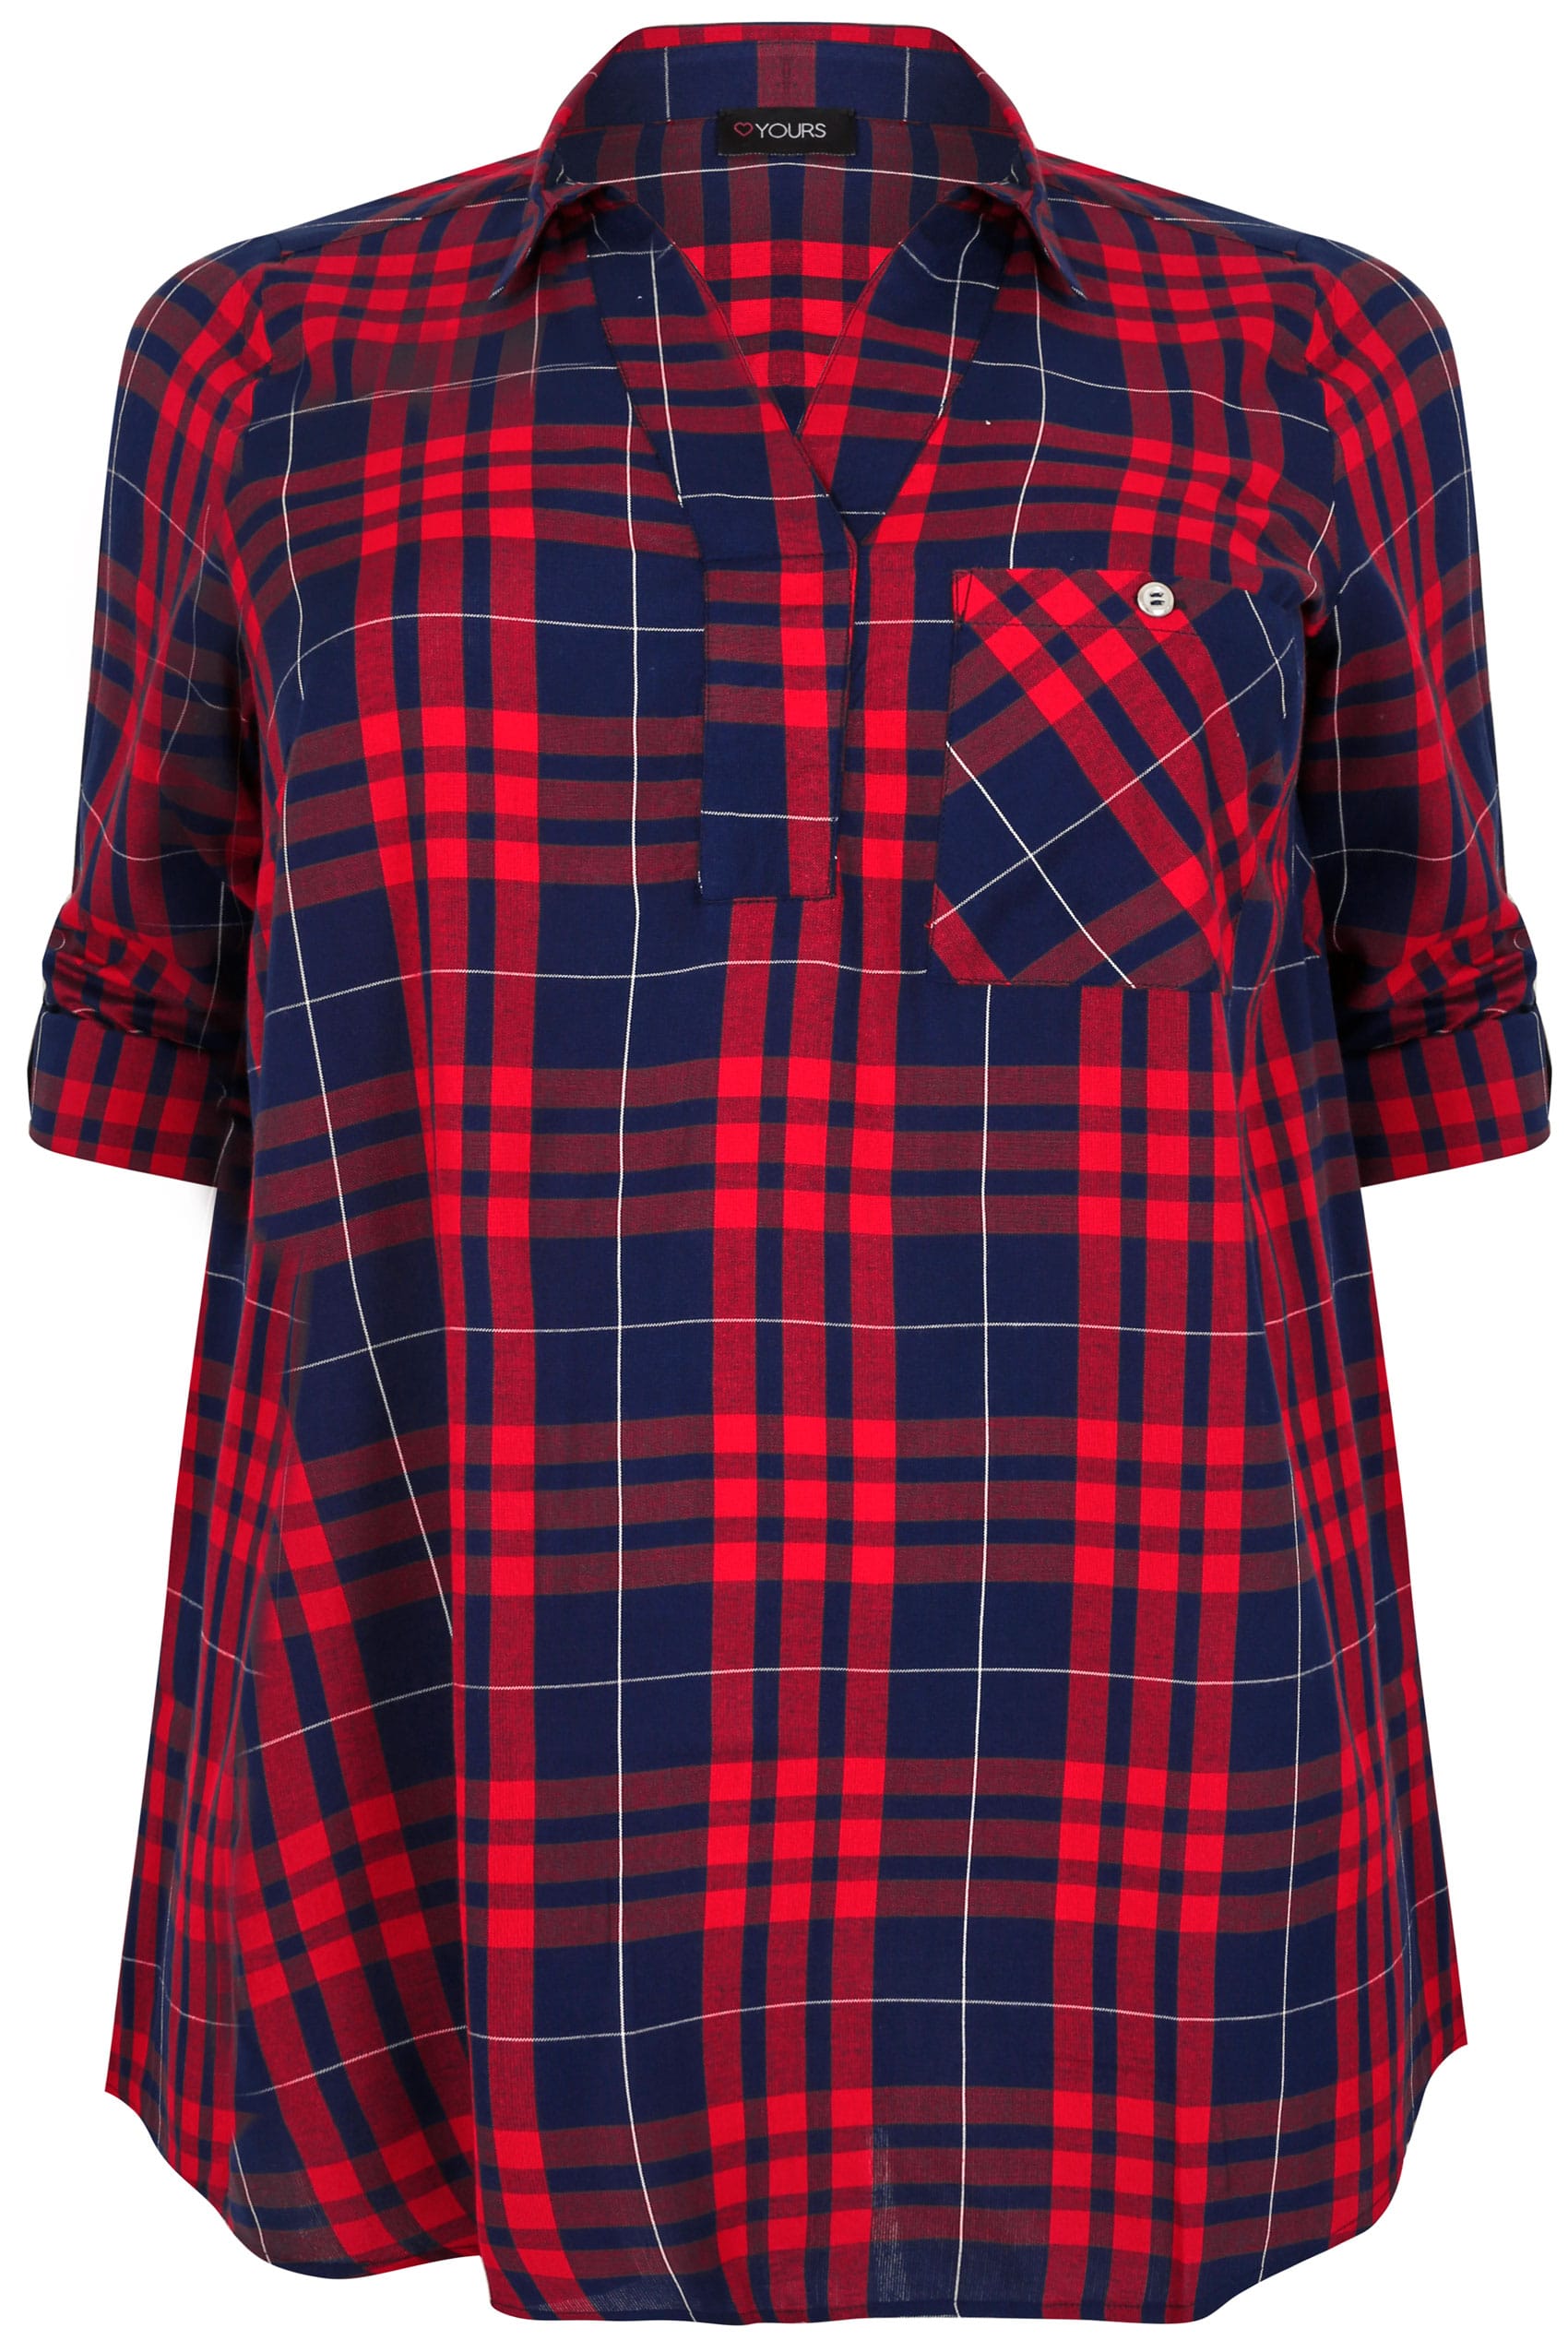 Navy & Red Oversized Checked Shirt With V-Neck, Plus size 16 to 36